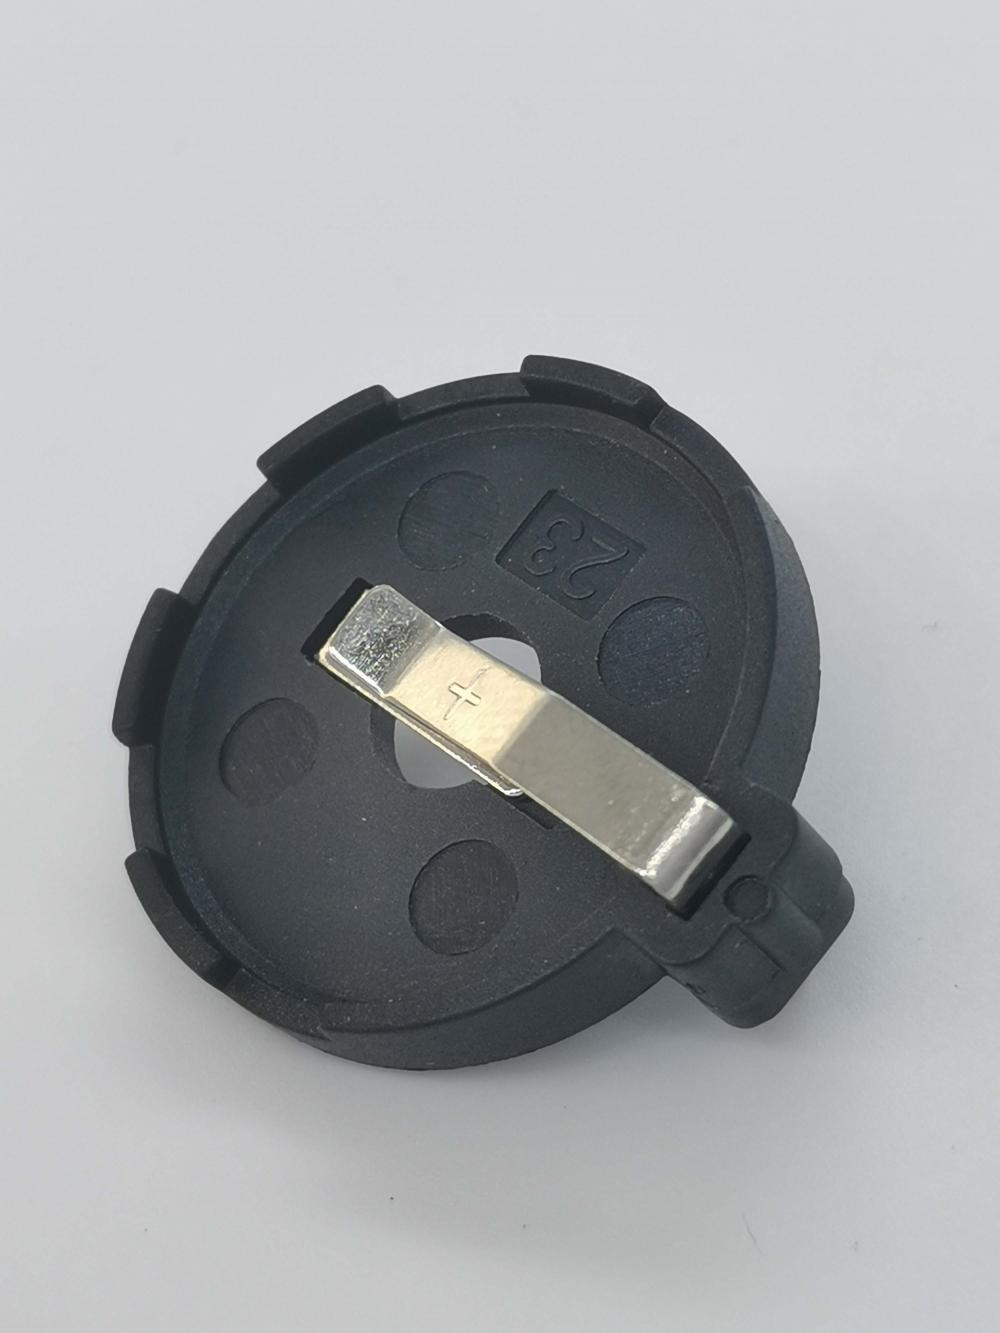 Battery Holder Coin 20MM 1 Cell PC Pin